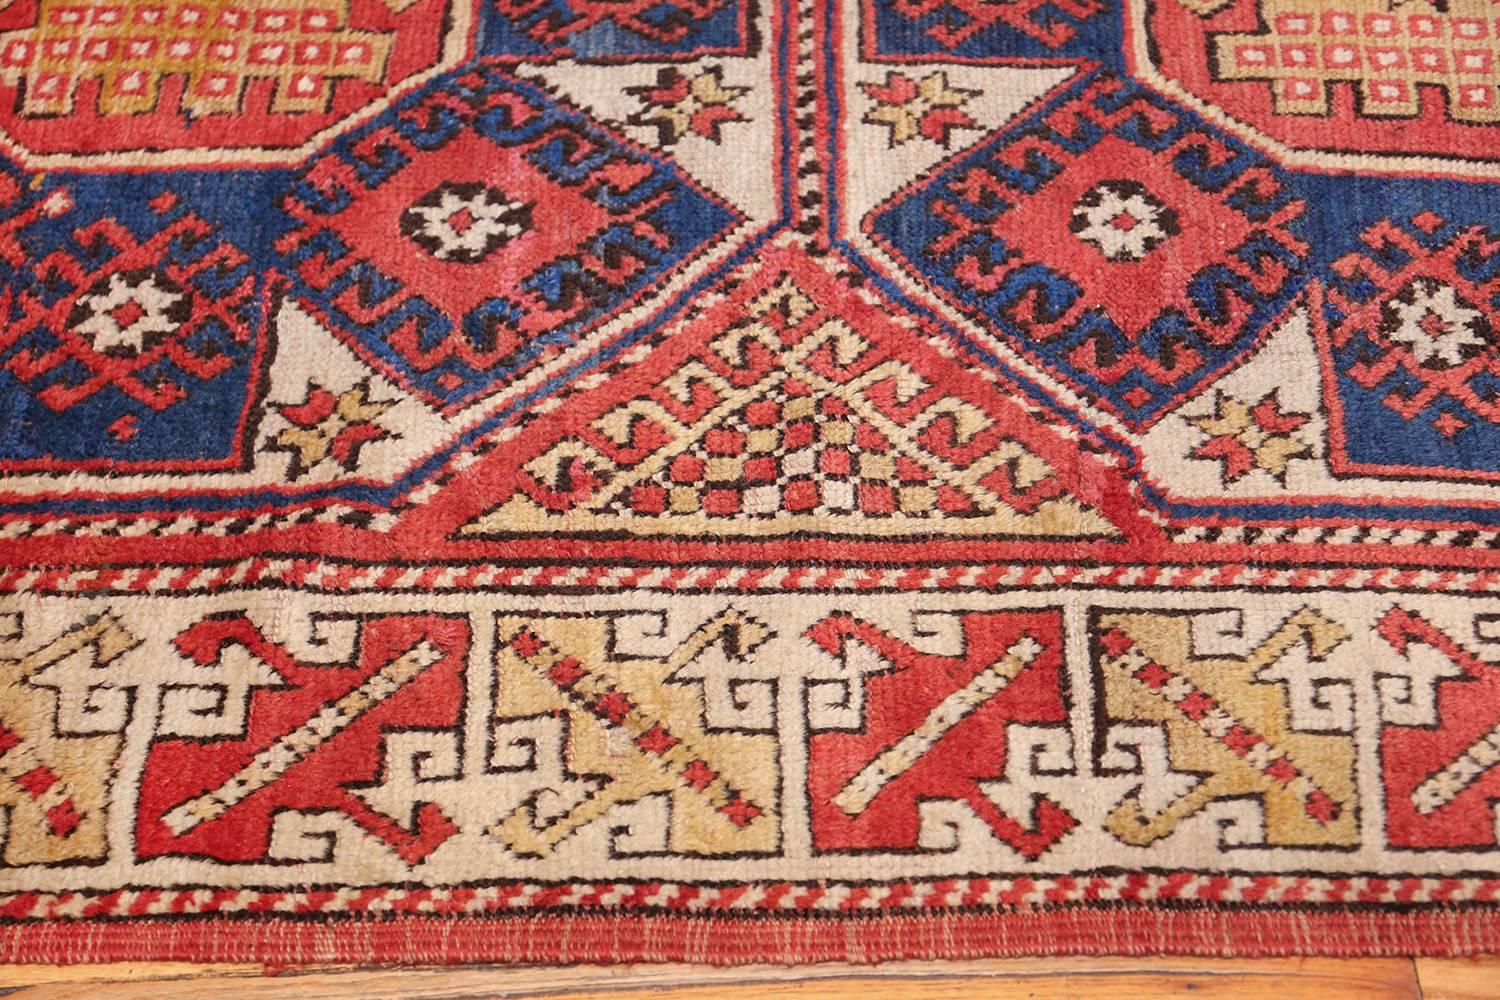 19th Century Small Scatter Size Tribal Antique Bergama Turkish Rug. Size: 4 ft 6 in x 7 ft 